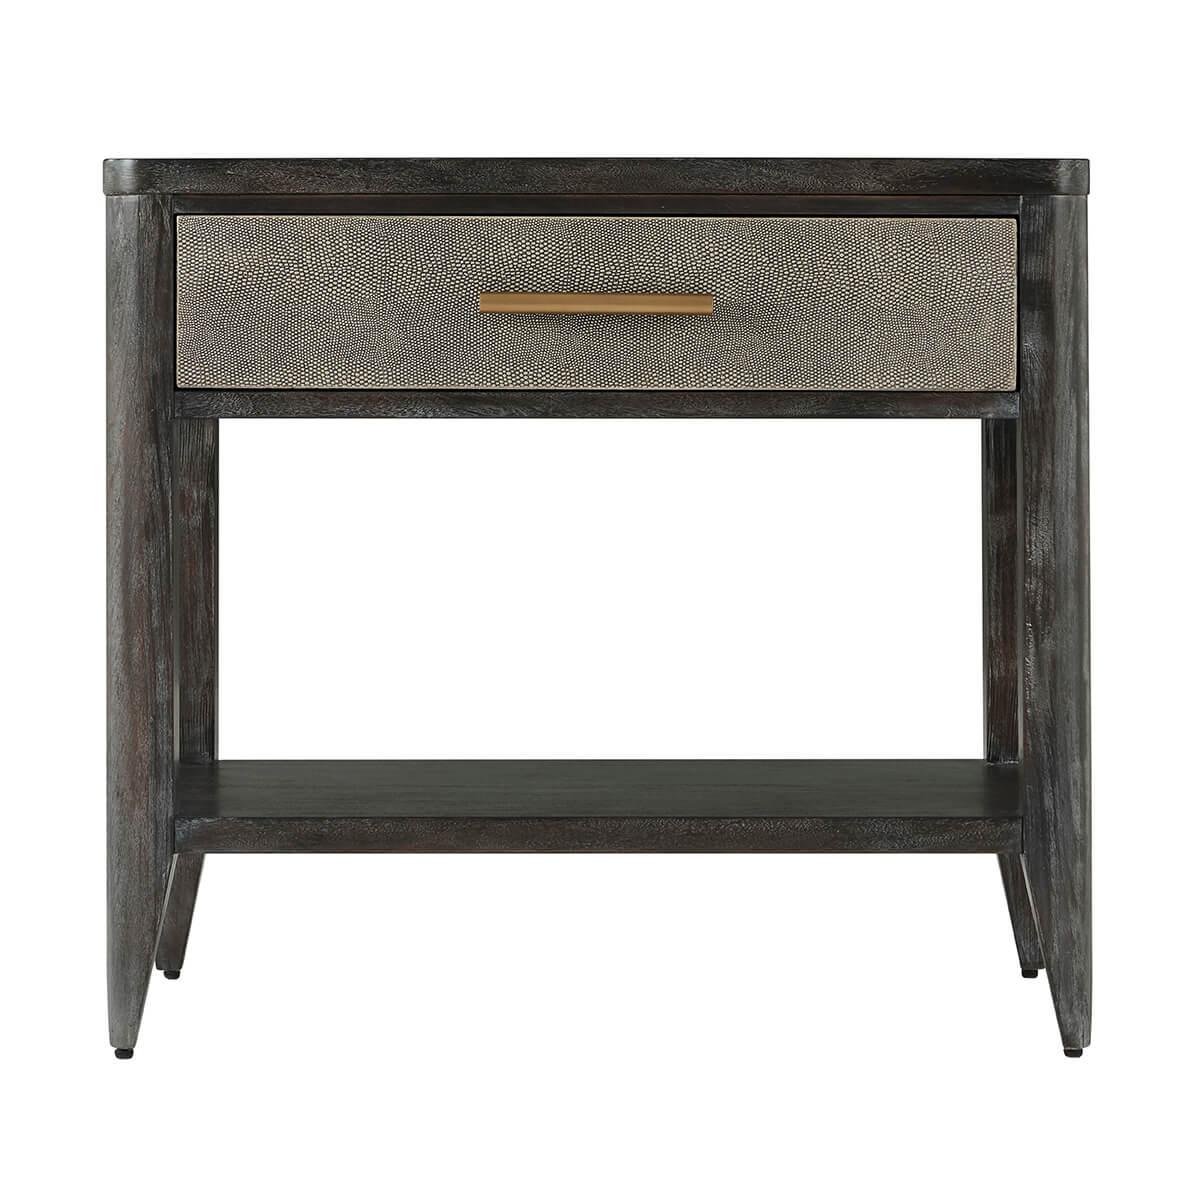 with Komodo embossed leather sides. The rectangular bedside table has a soft-closing single drawer with a brushed brass handle, curbed corners and a lower shelf stretcher base.

Dimensions: 28